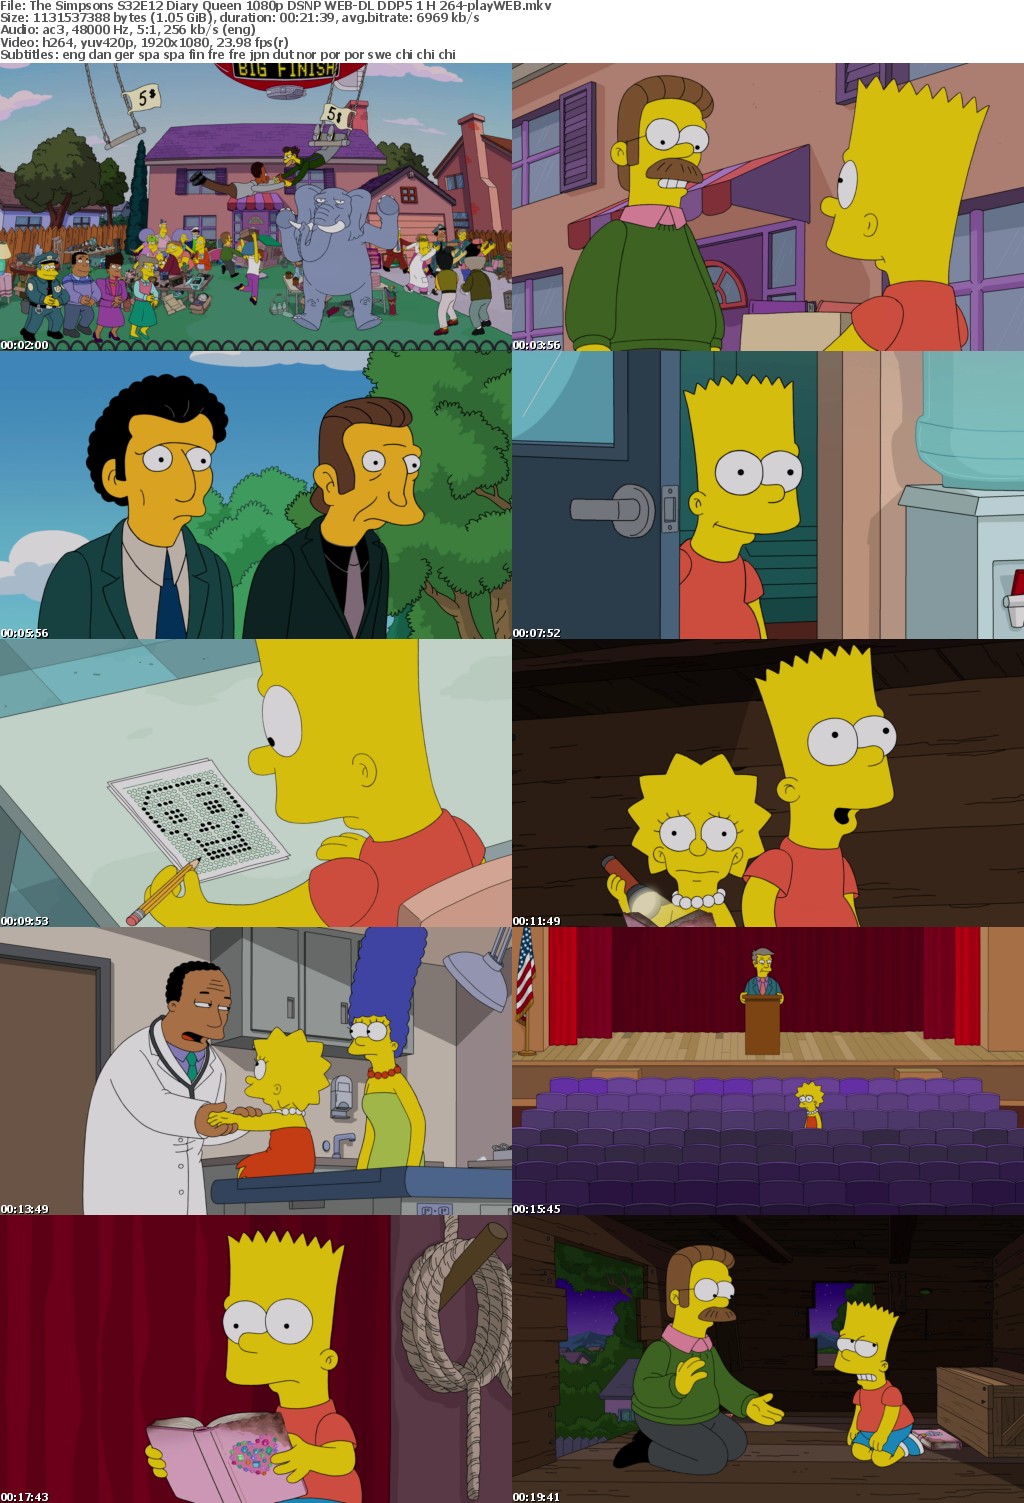 The Simpsons S32E12 Diary Queen 1080p DSNP WEB-DL DDP5 1 H 264-playWEB